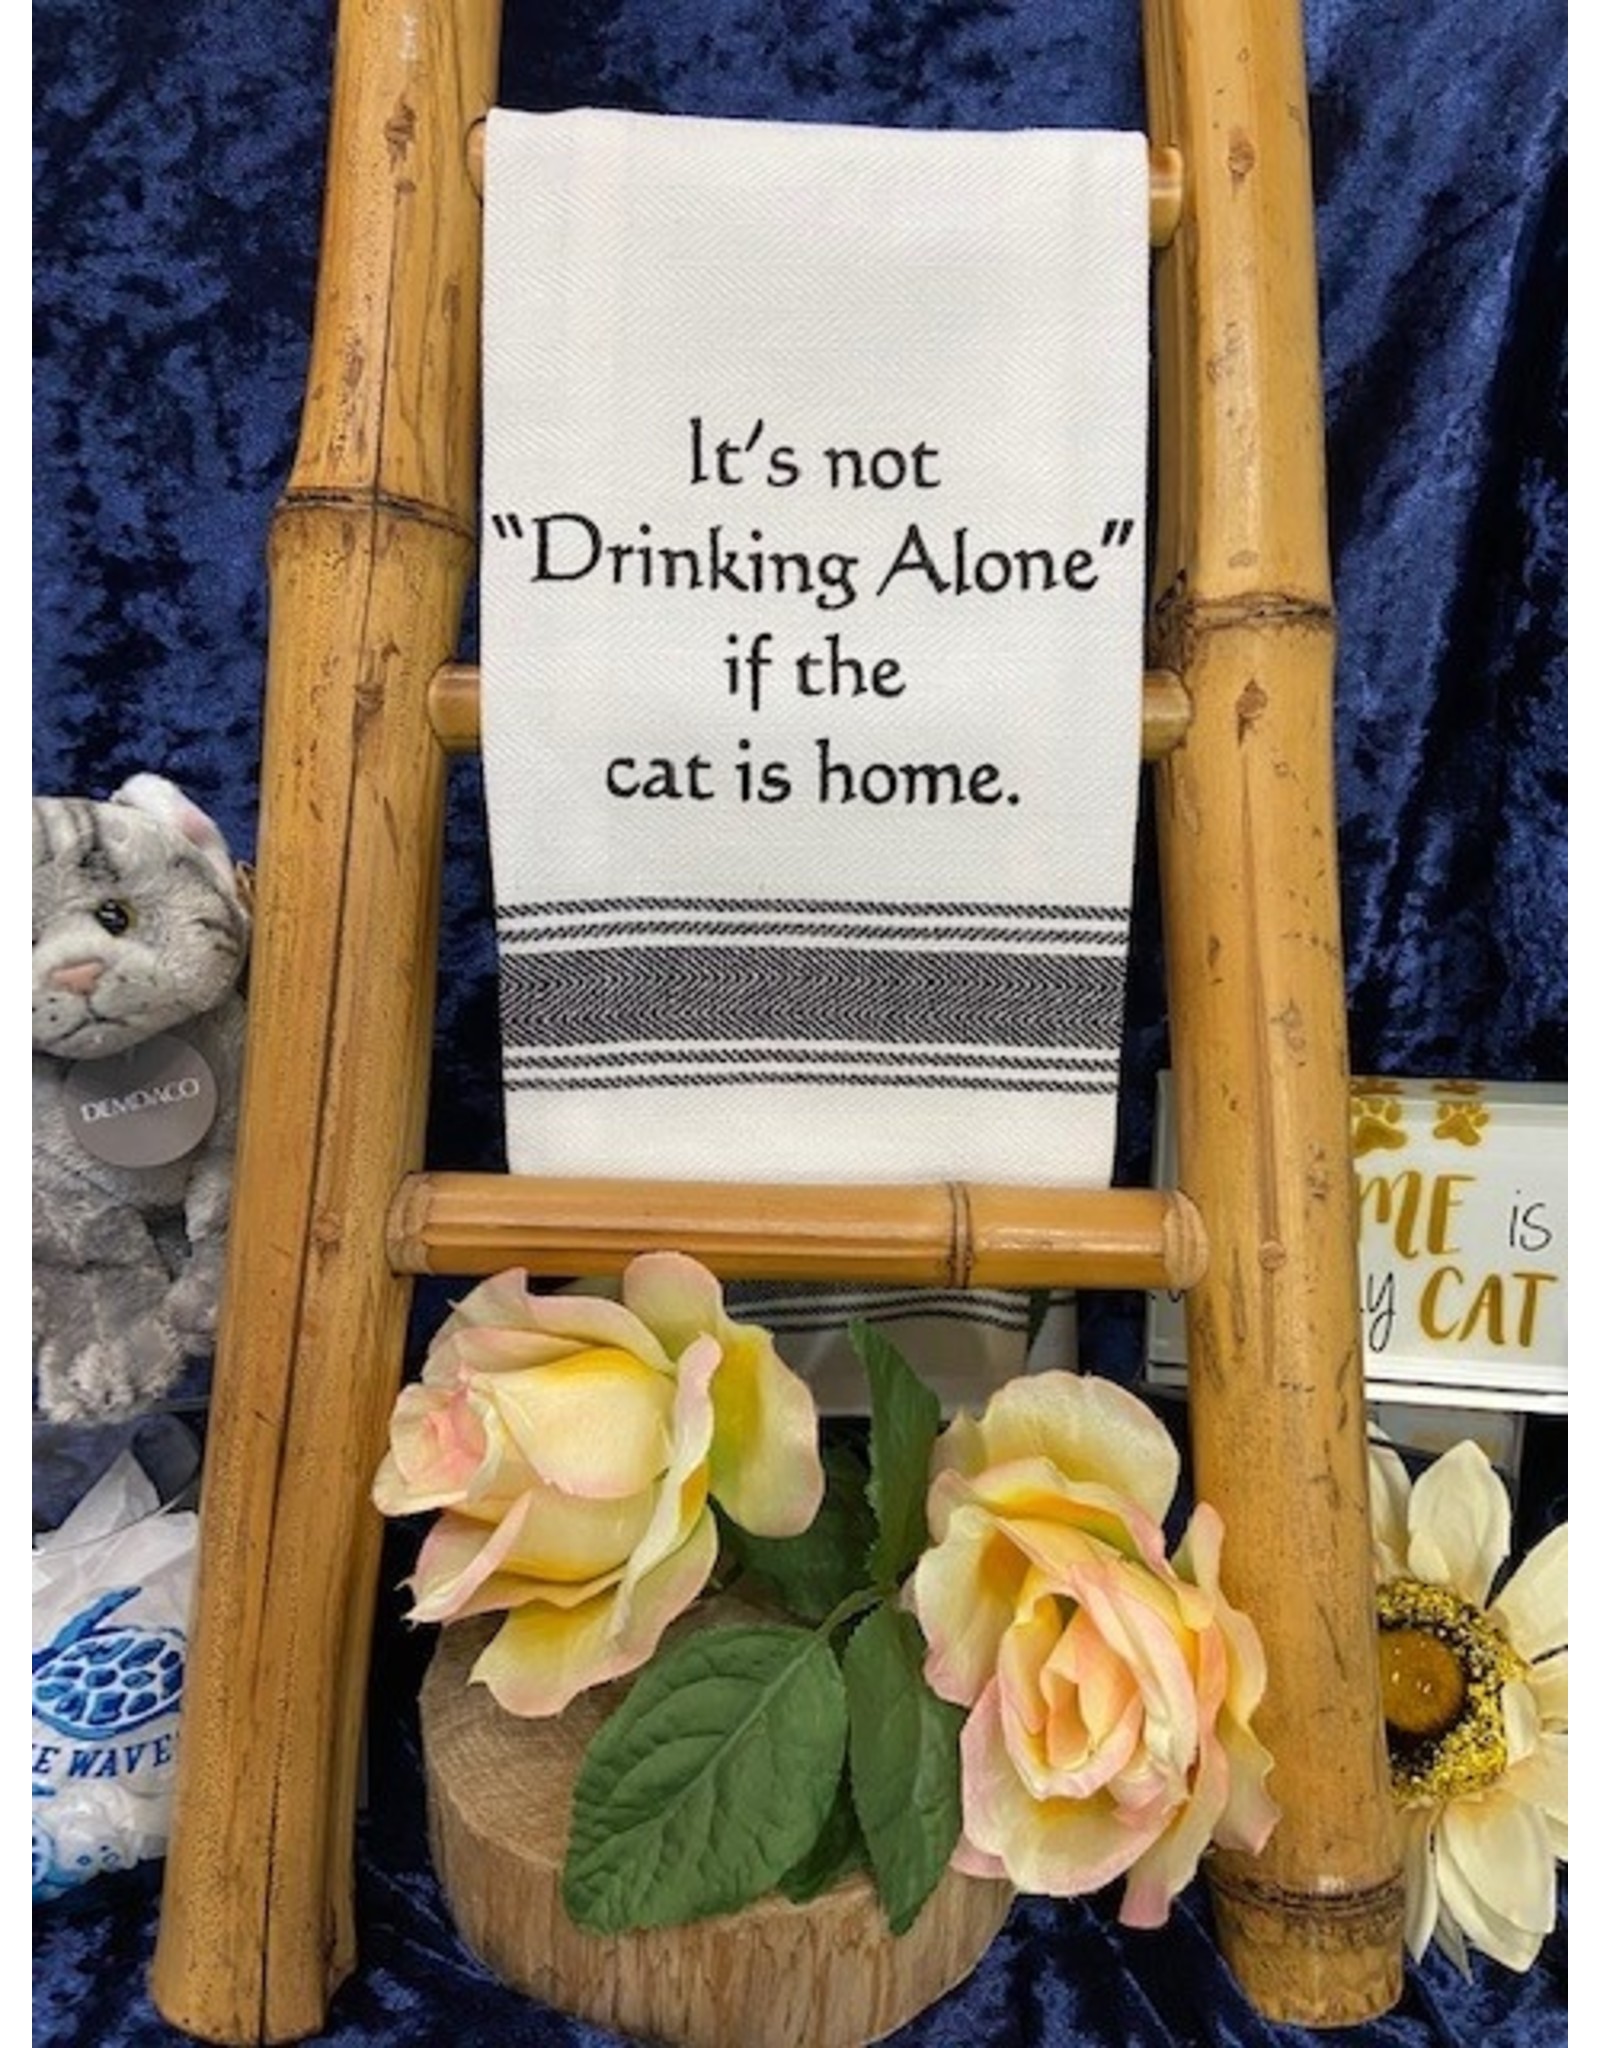 Wild Hare Designs "Drinking" Dish Towels